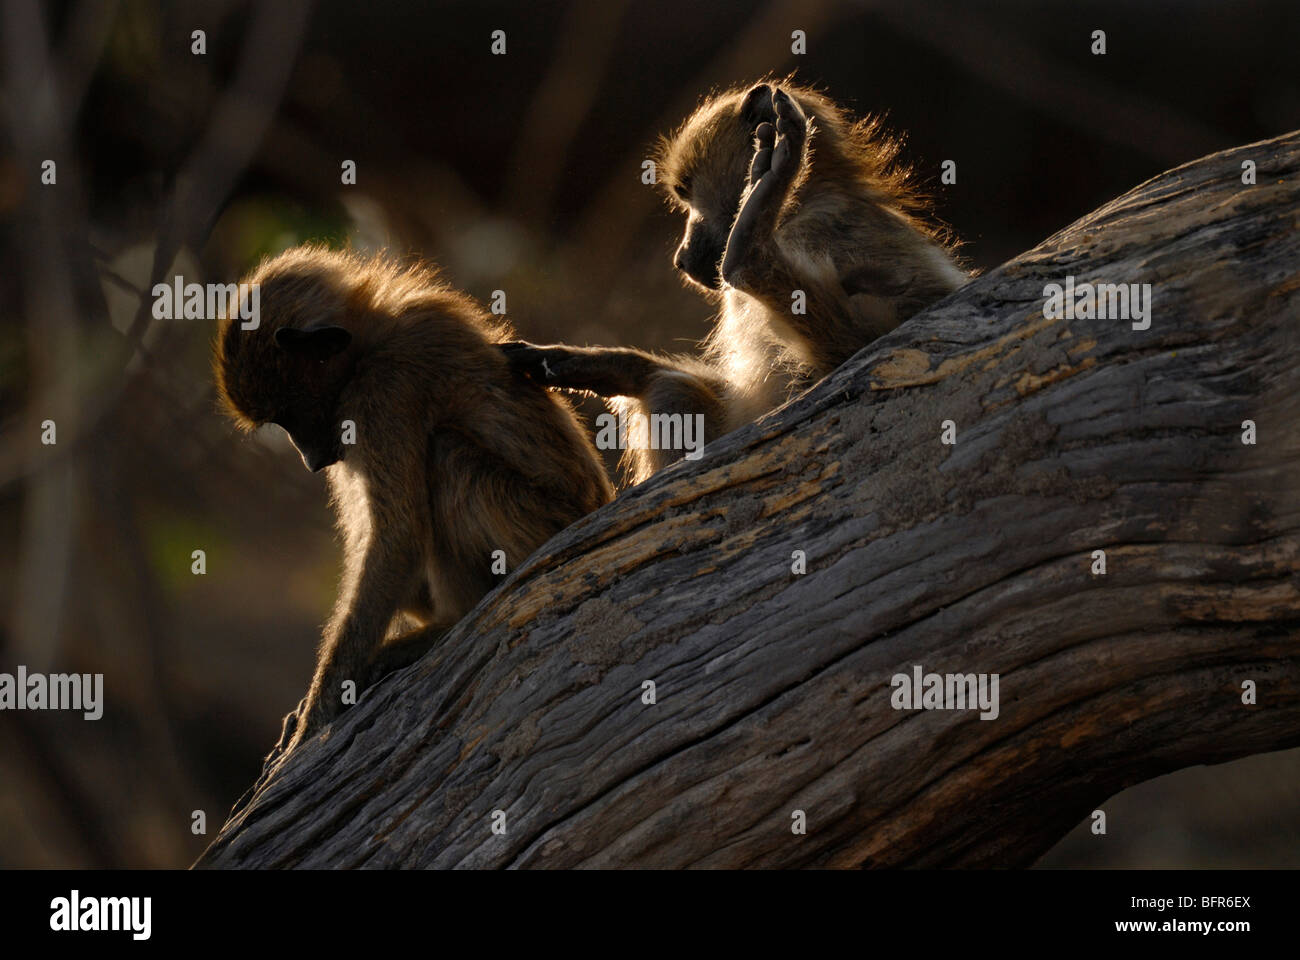 Pair of young baboons sitting in tree Stock Photo